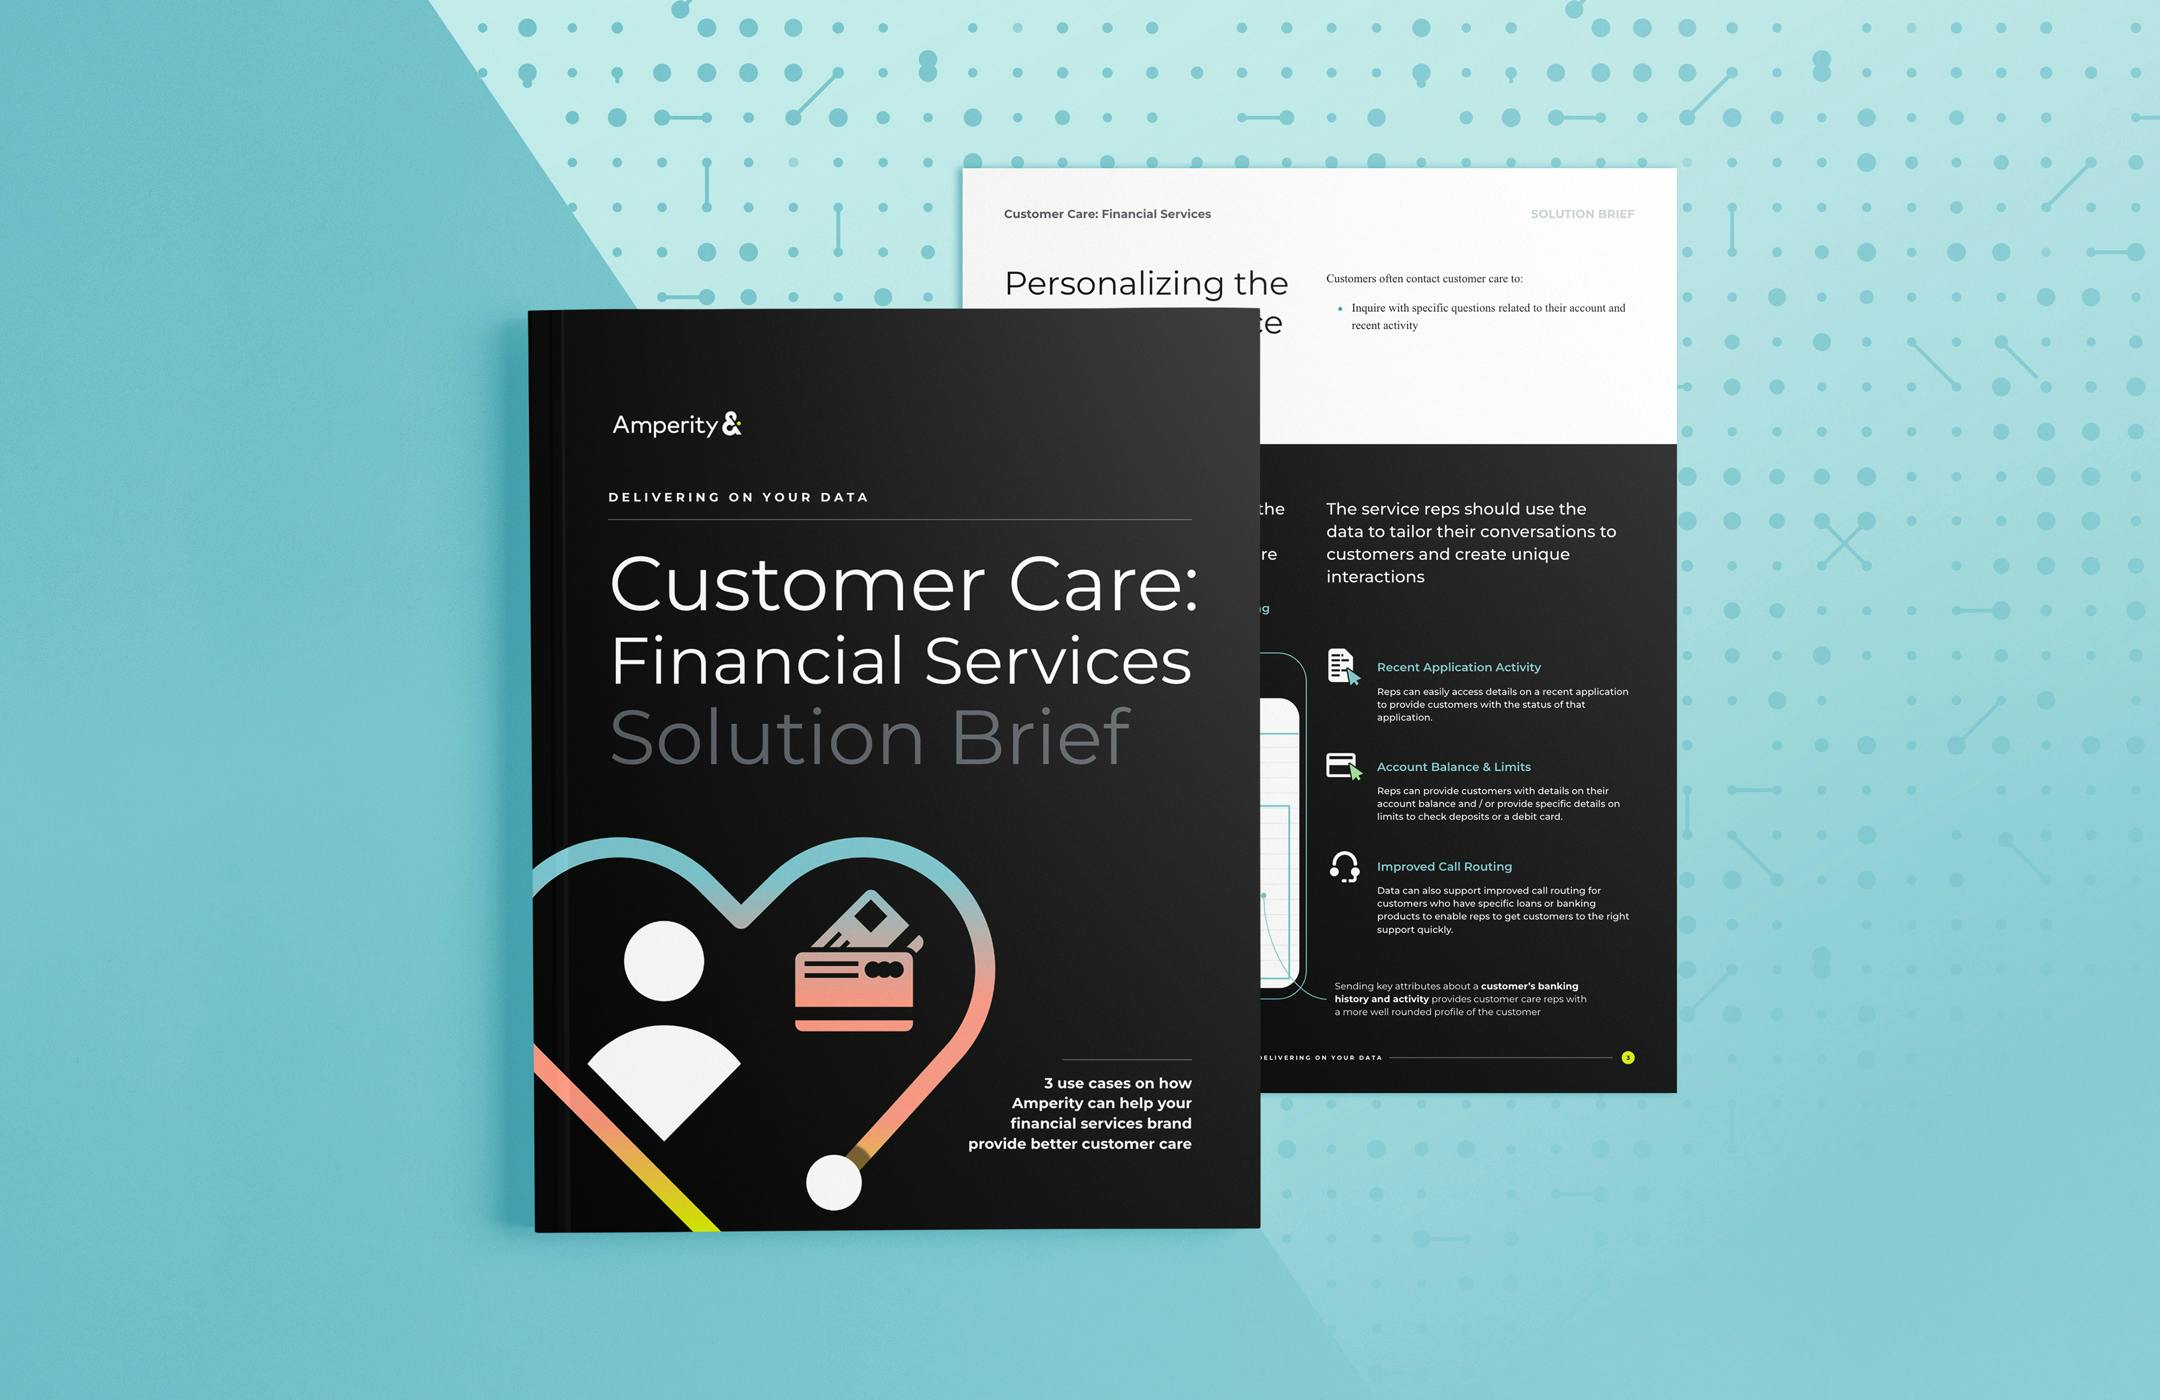 Preview image of the Customer Care for Financial Services Solution Brief